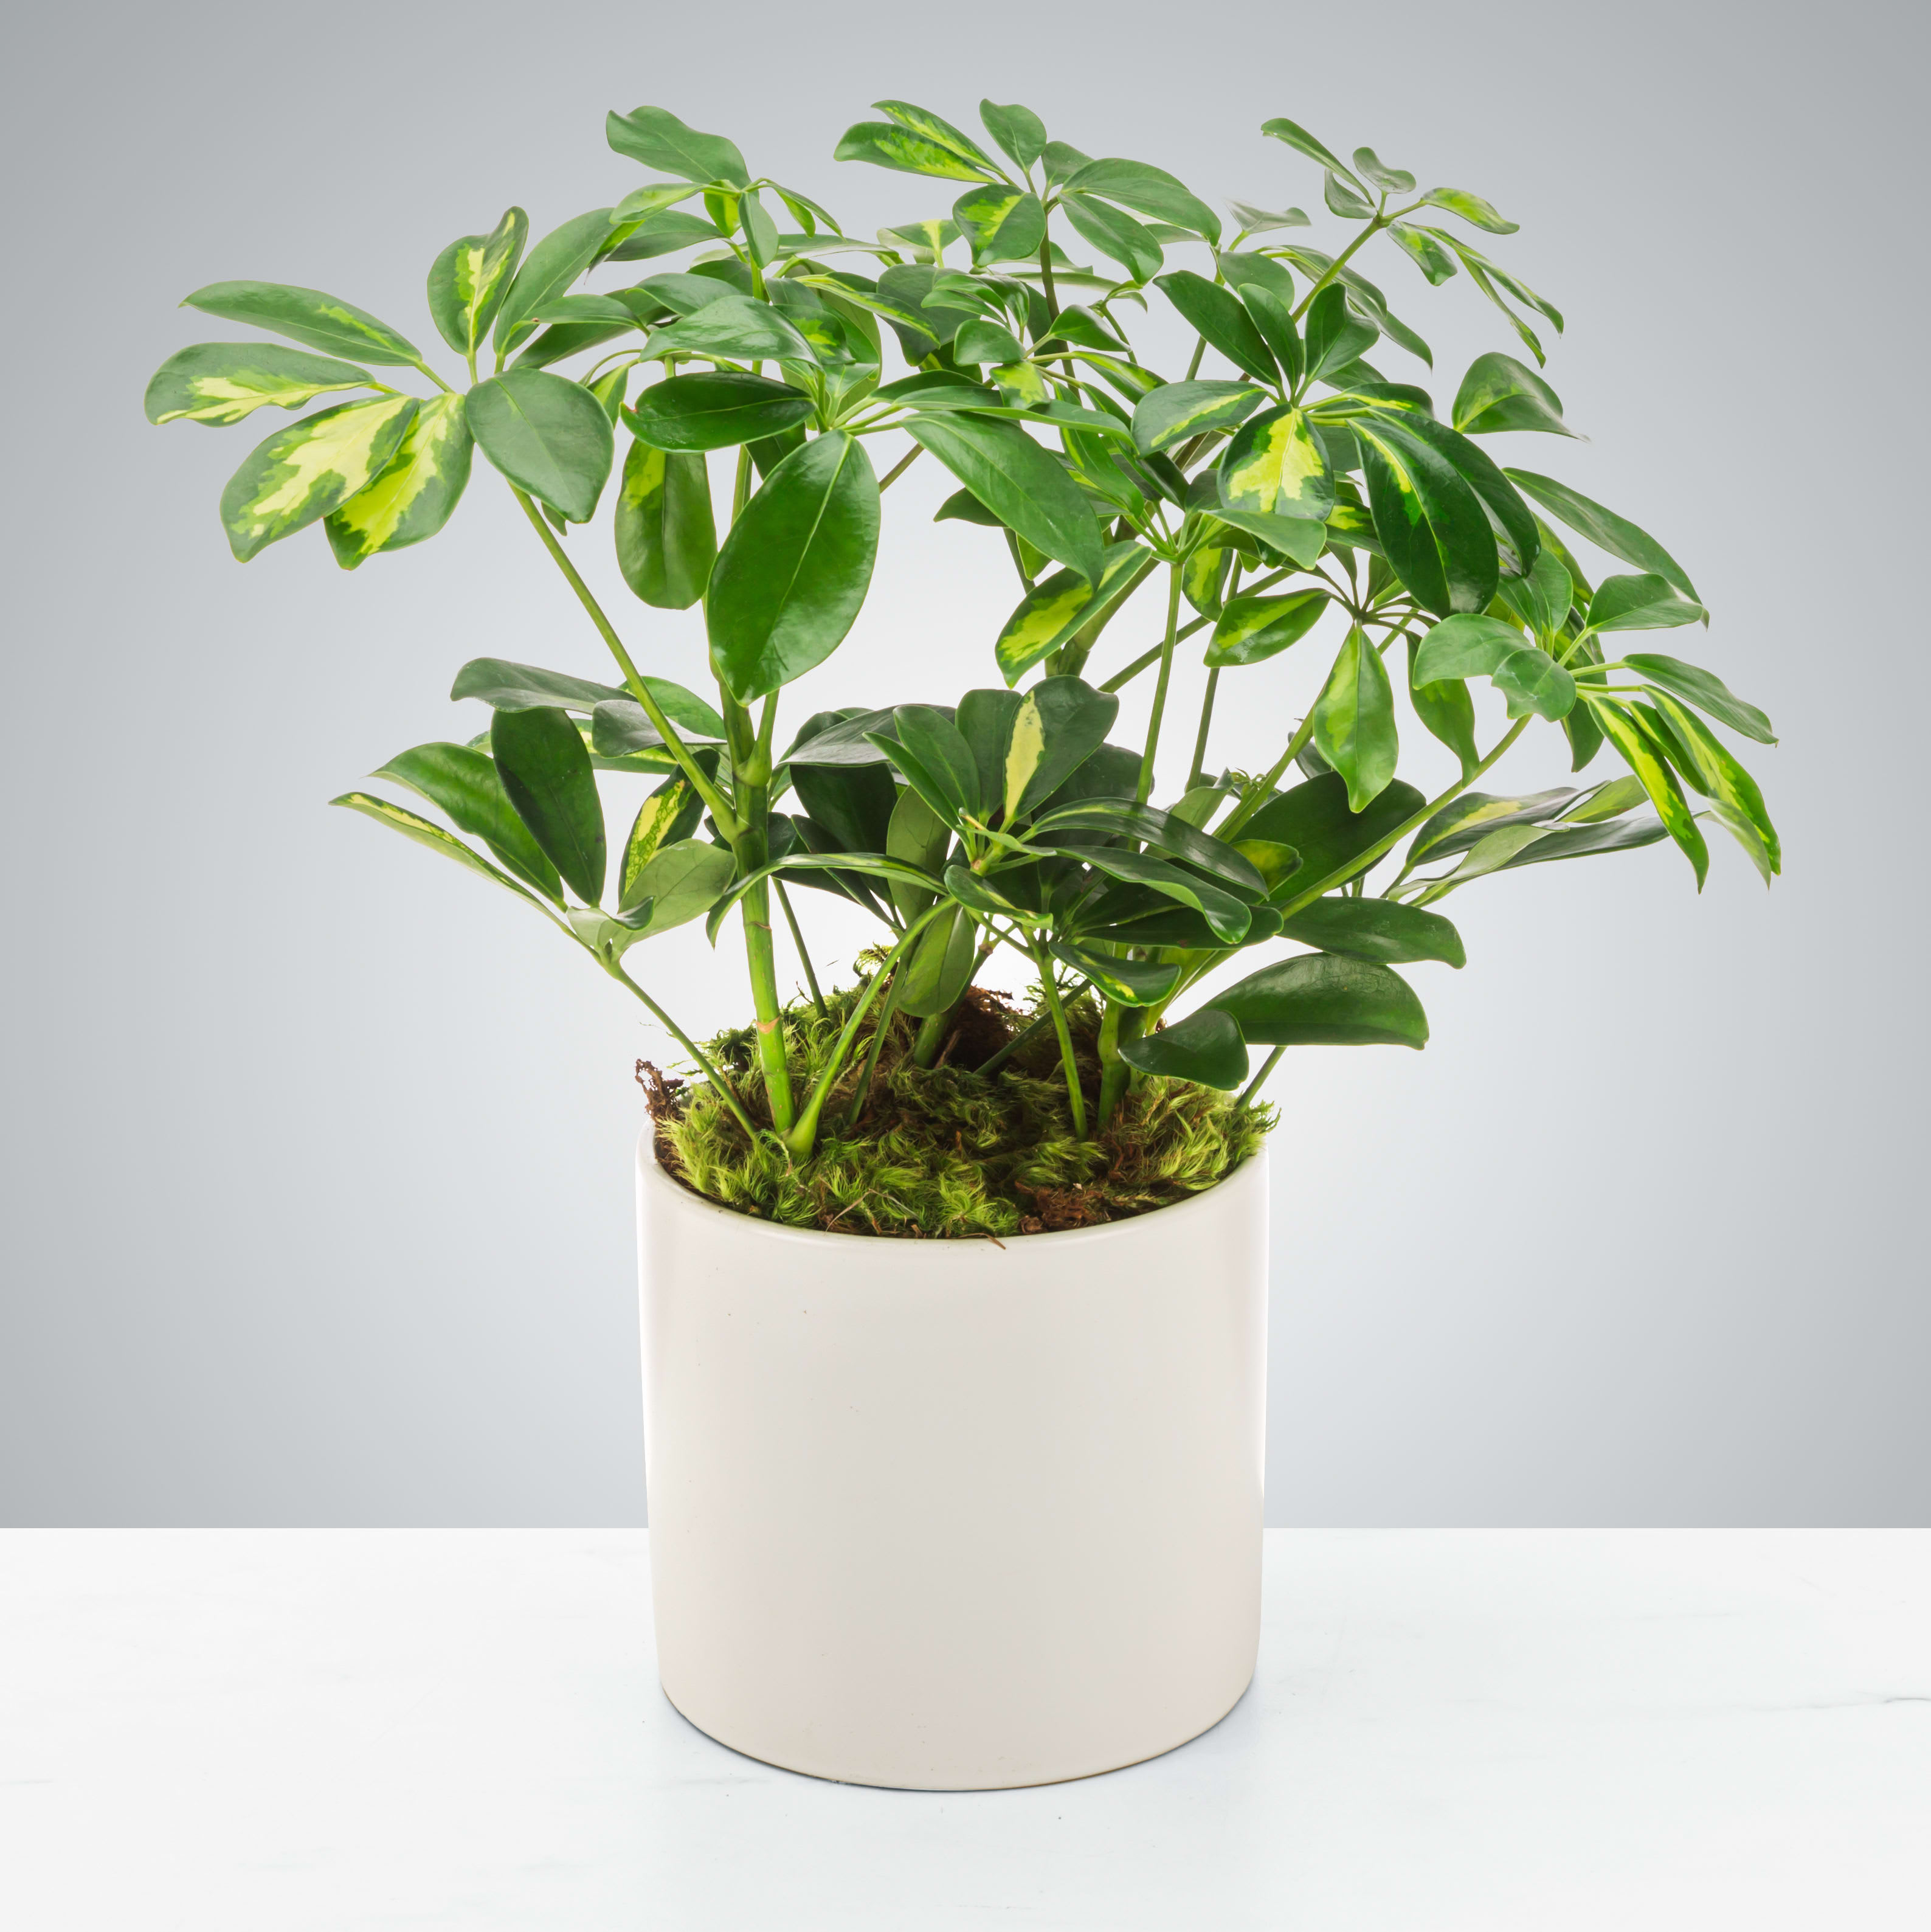 Umbrella Plant - Also known as dwarf schefflera, umbrella plants like bright, indirect light. Their cute shape and easy care make them a good choice for houseplants. Consider this little guy for your plant-loving friend or family member as a birthday or congratulations gift! (exact container may vary, call for more information)